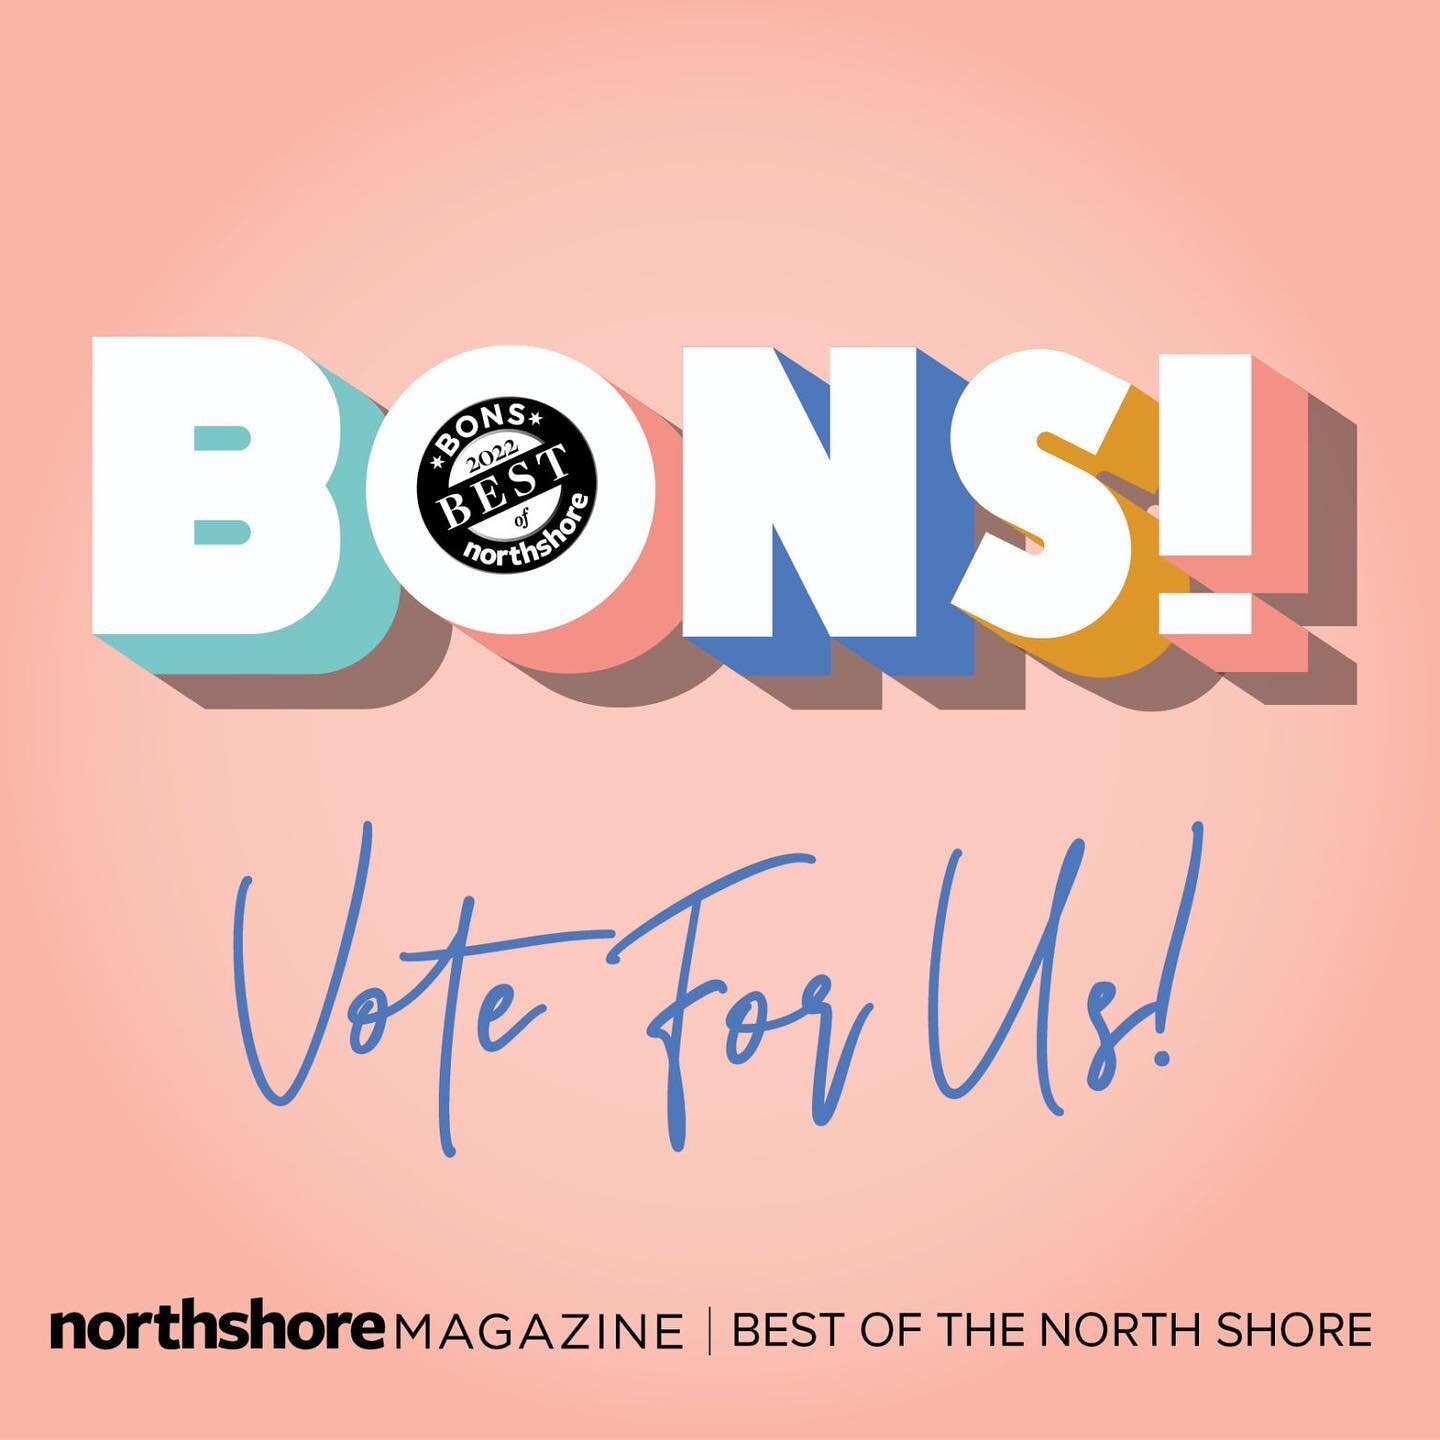 The Newburyport Art Association is nominated for this year&rsquo;s #BONS Reader&rsquo;s Choice Awards! 🎉 We are so so grateful for the support from our NAA community and would greatly appreciate if you voted for us again this year! 🙏 We are nominat